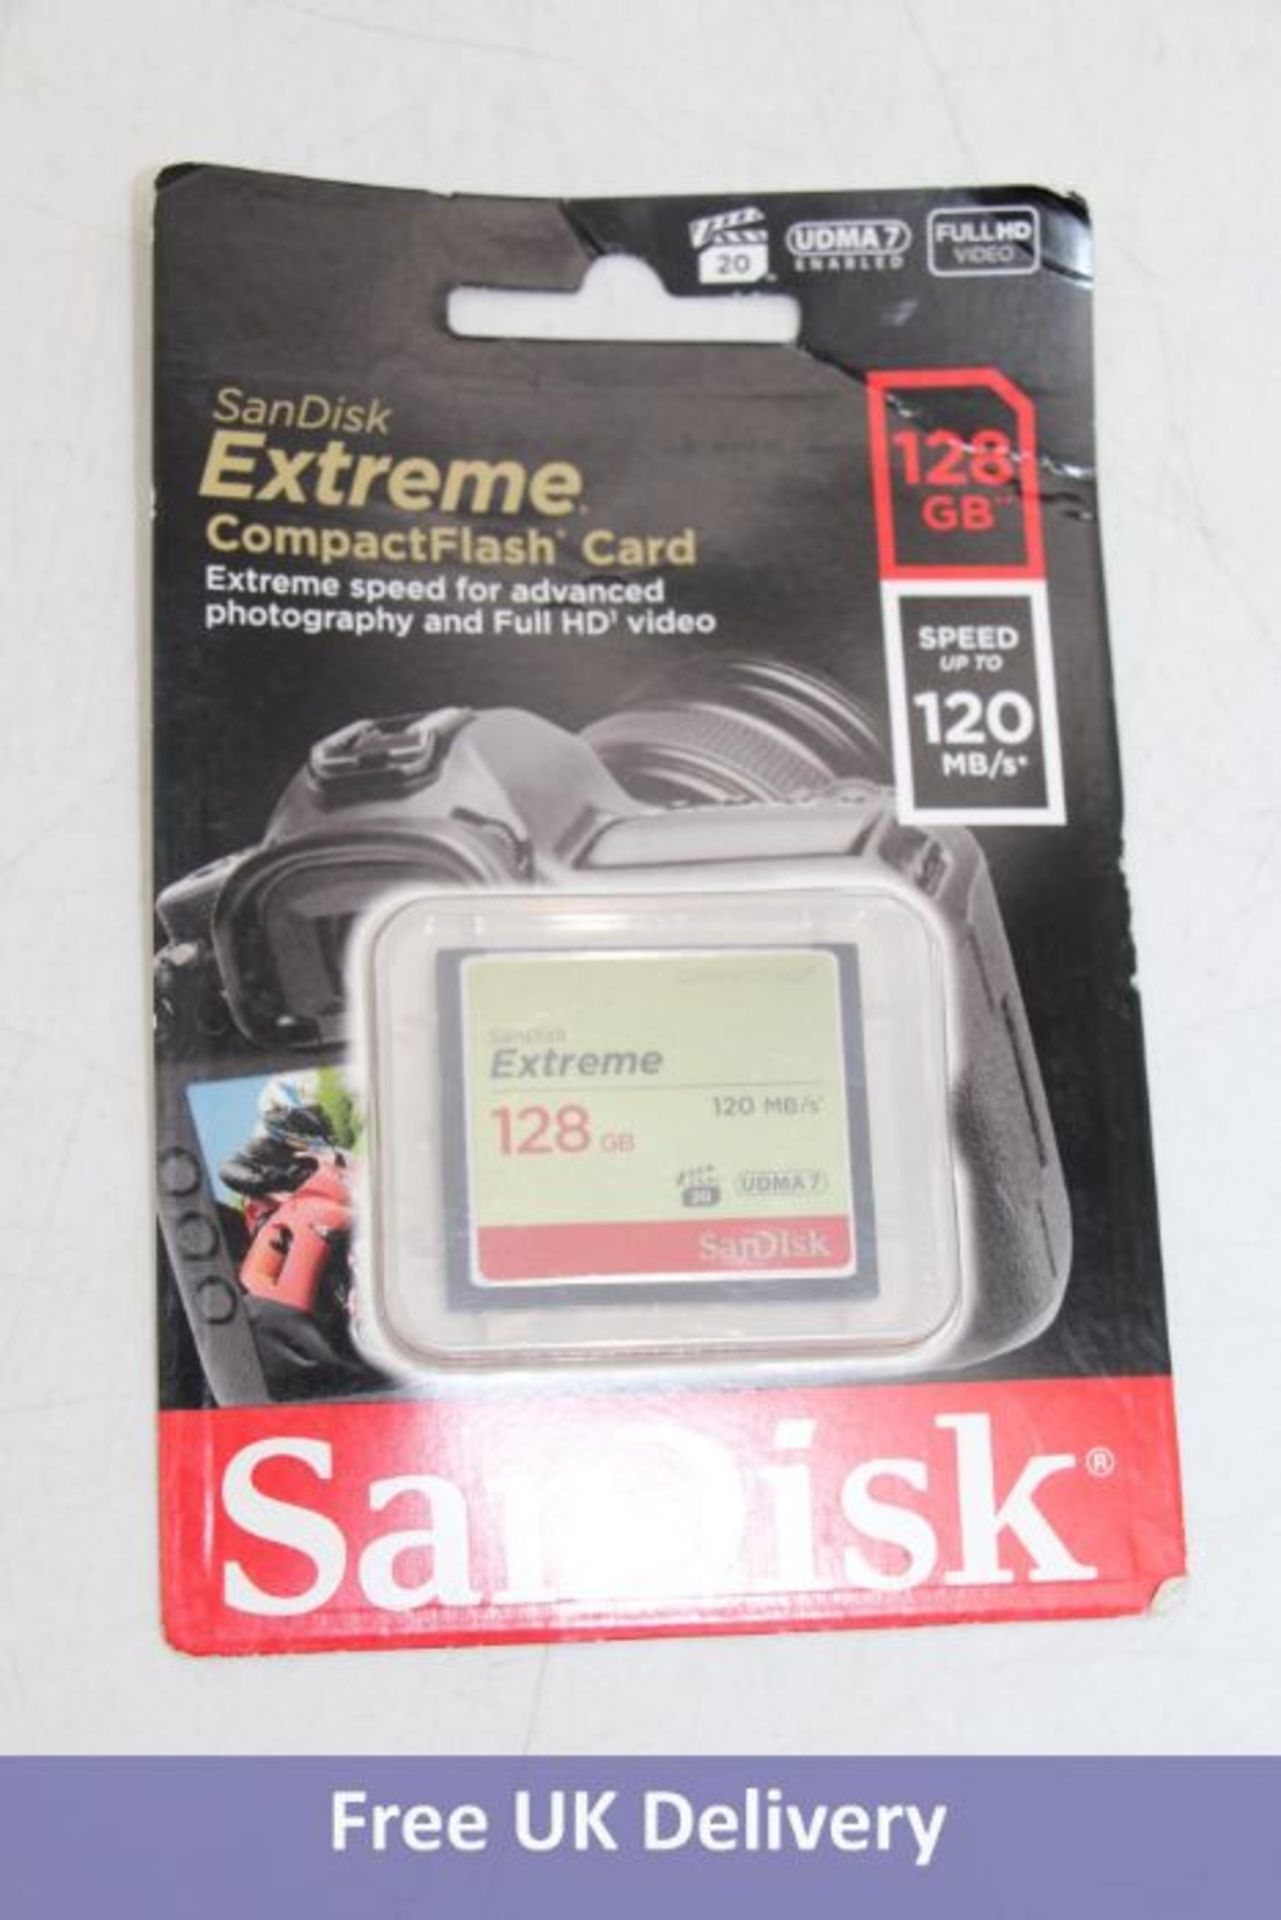 Three SanDisk Extreme Compact Flash Cards, 128GB